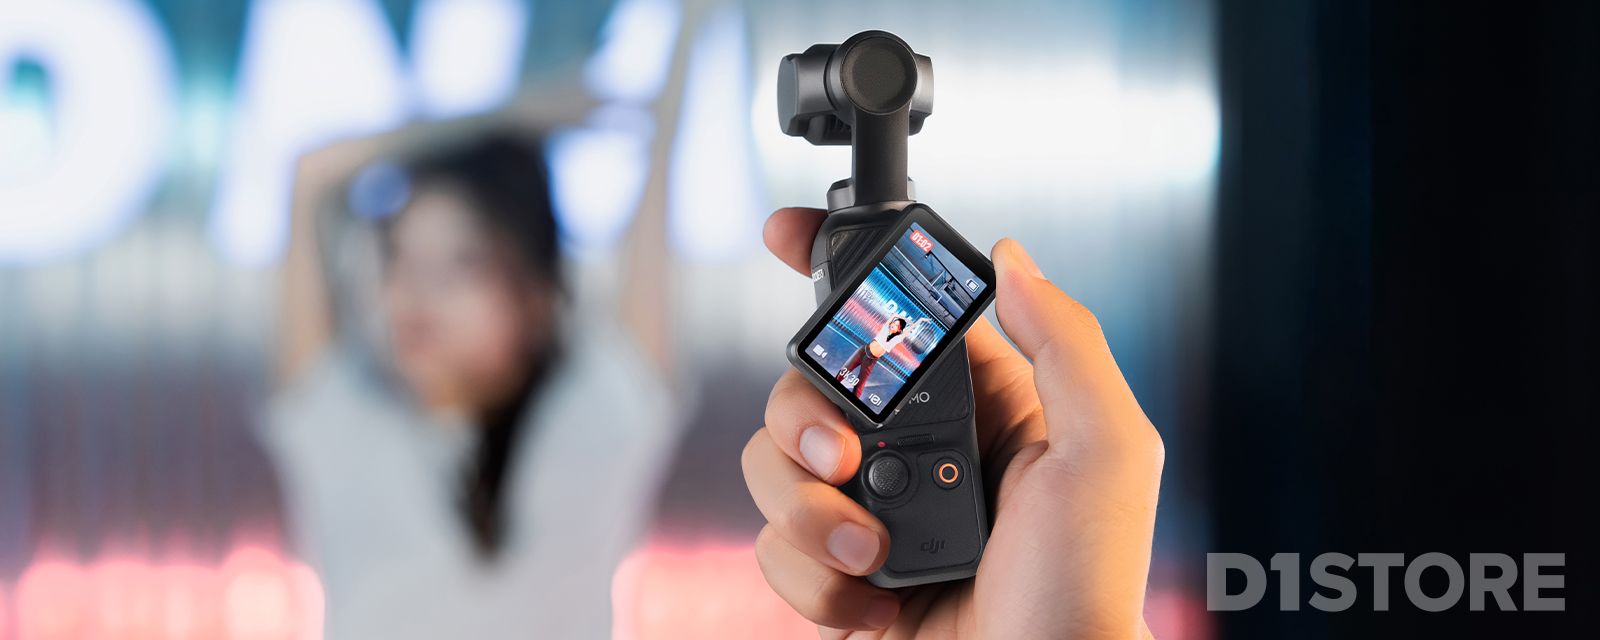 Osmo Pocket 3 gimbal camera in use with rotatable OLED touchscreen